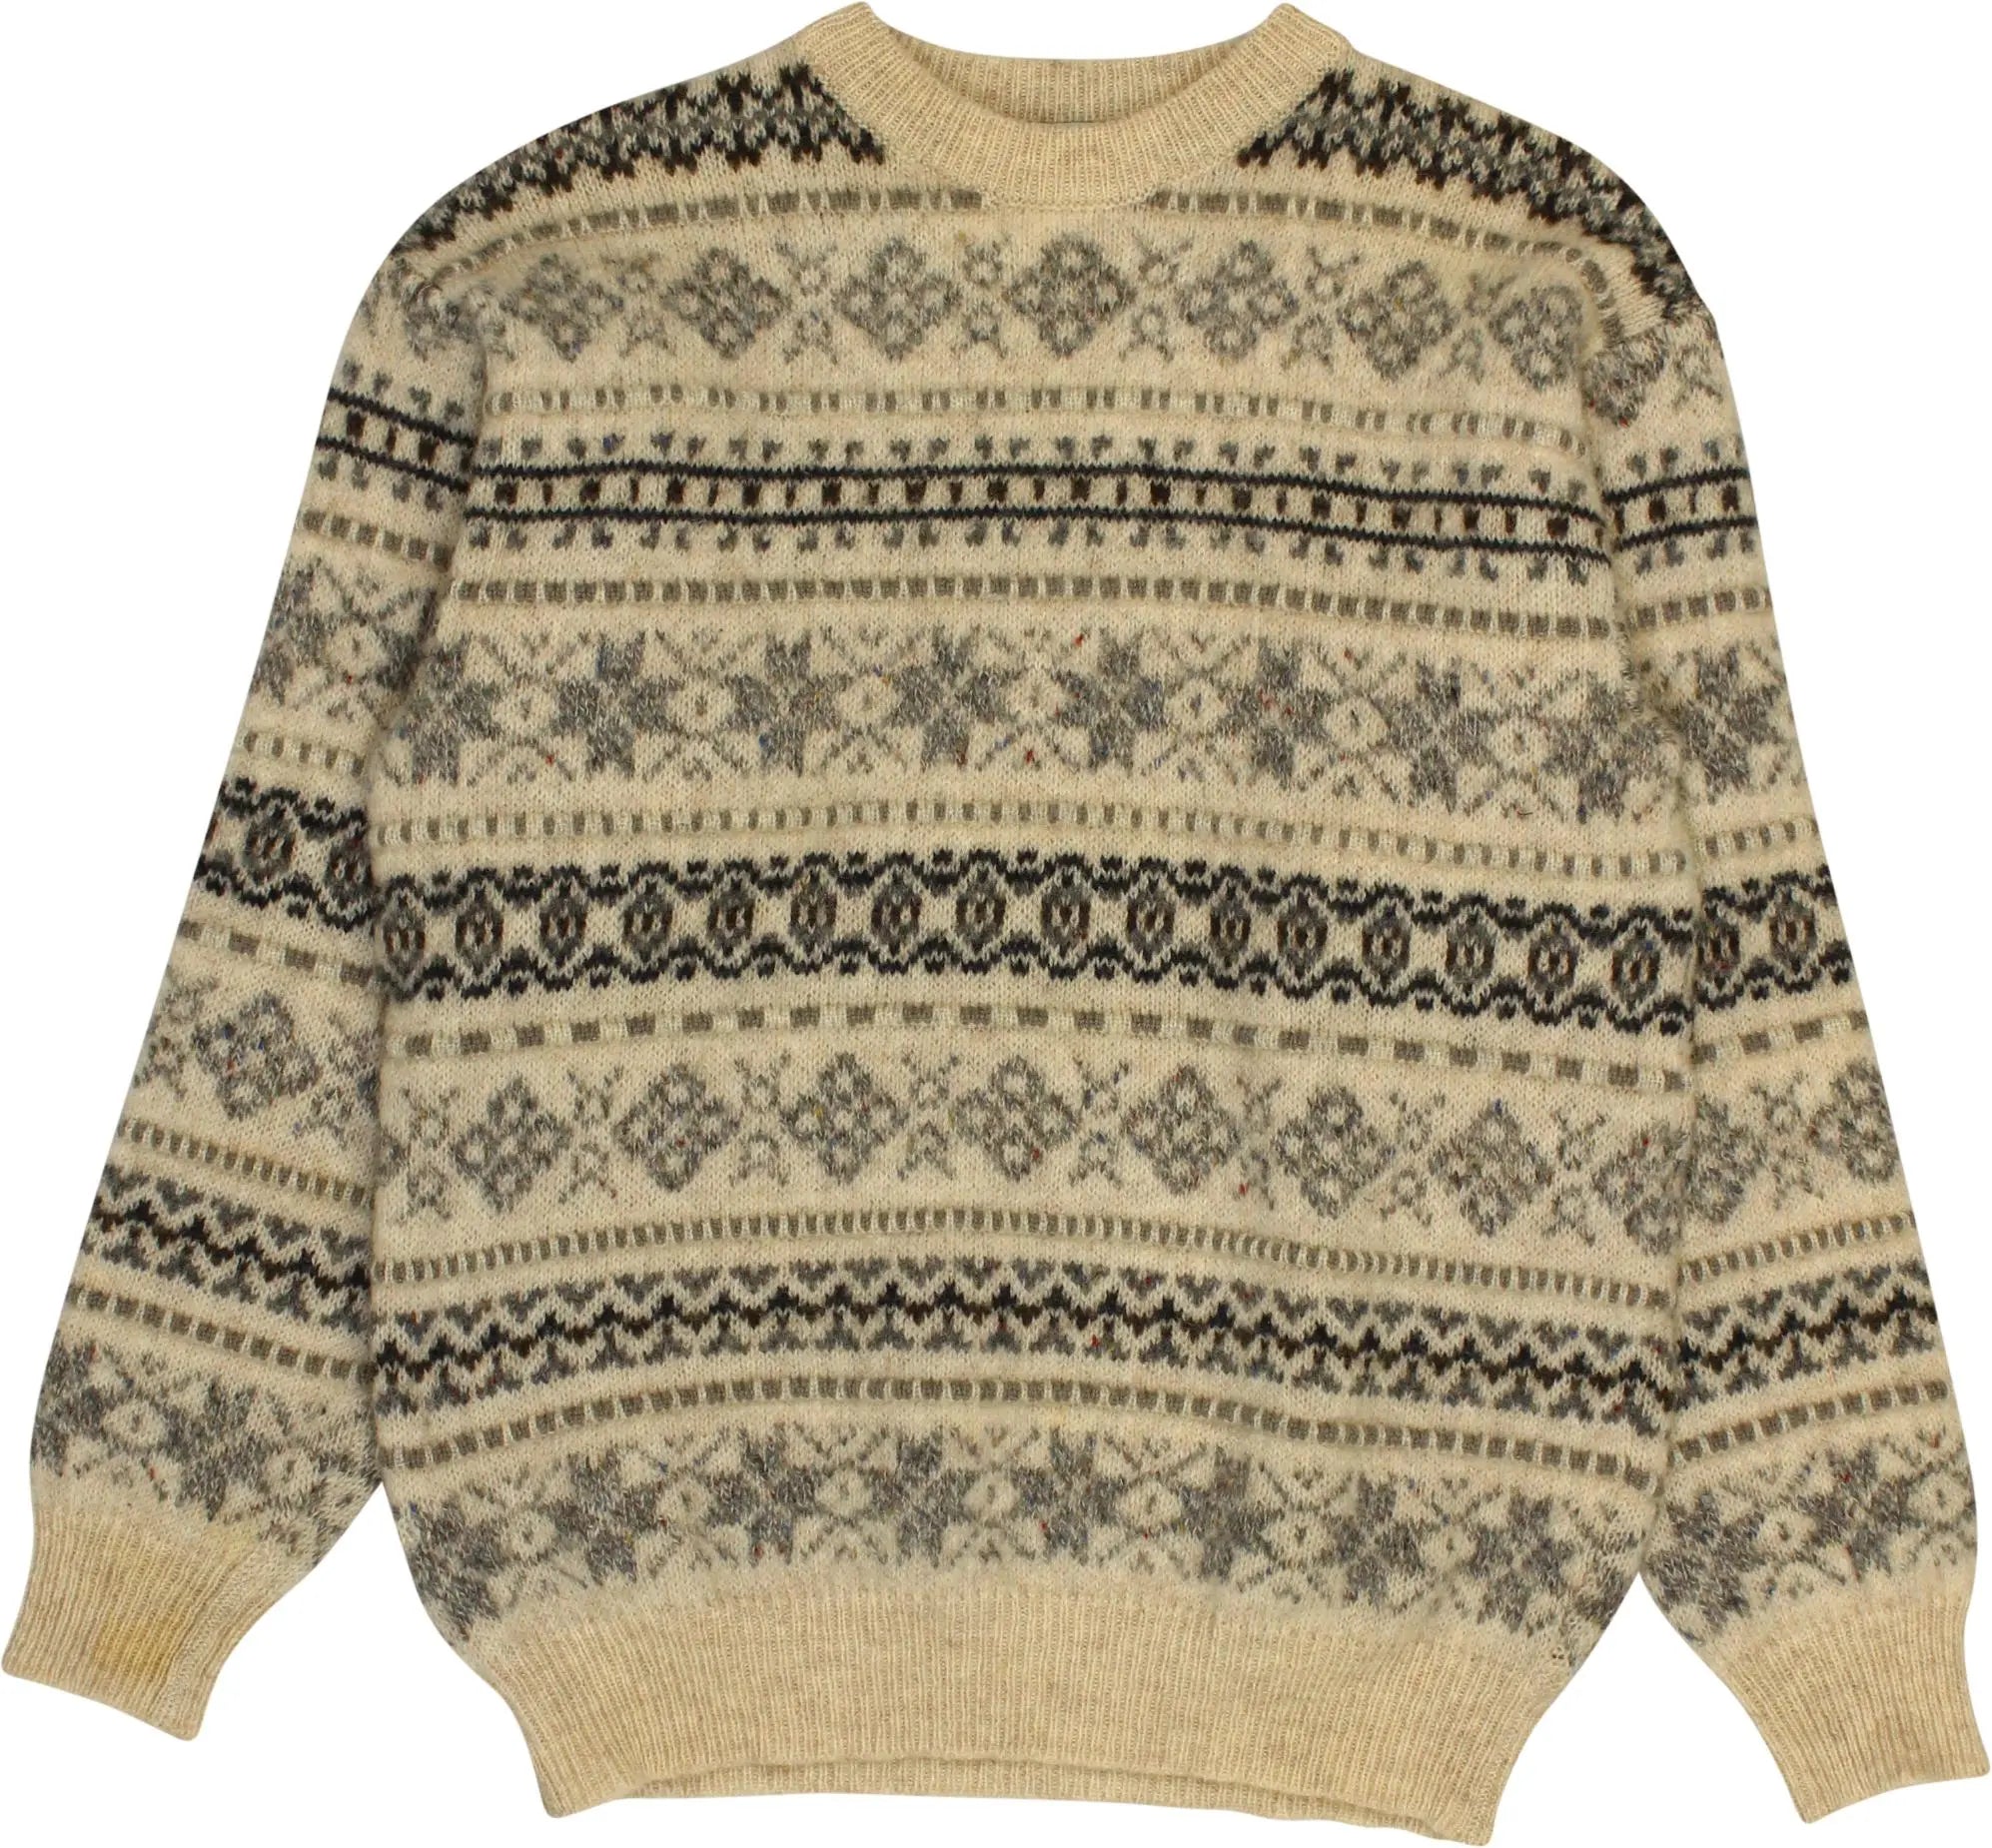 Genfins - Scottish wool Jumper- ThriftTale.com - Vintage and second handclothing